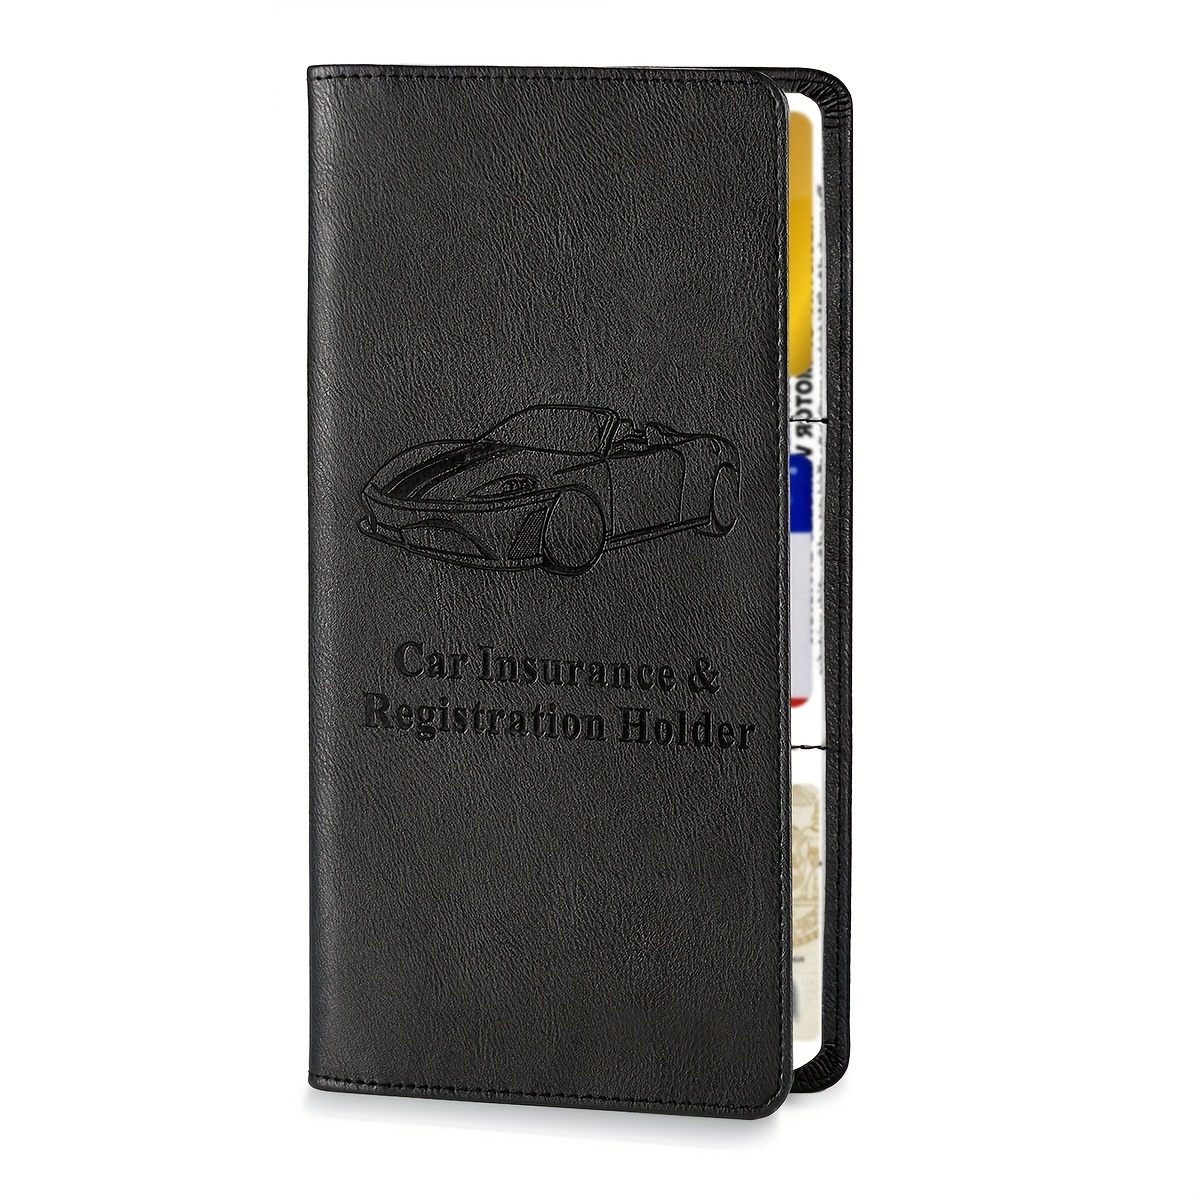 

Car Registration & Insurance Card Holder For Women And Men, Auto Glove Box Organizer Document Wallet Leather Manual Folder